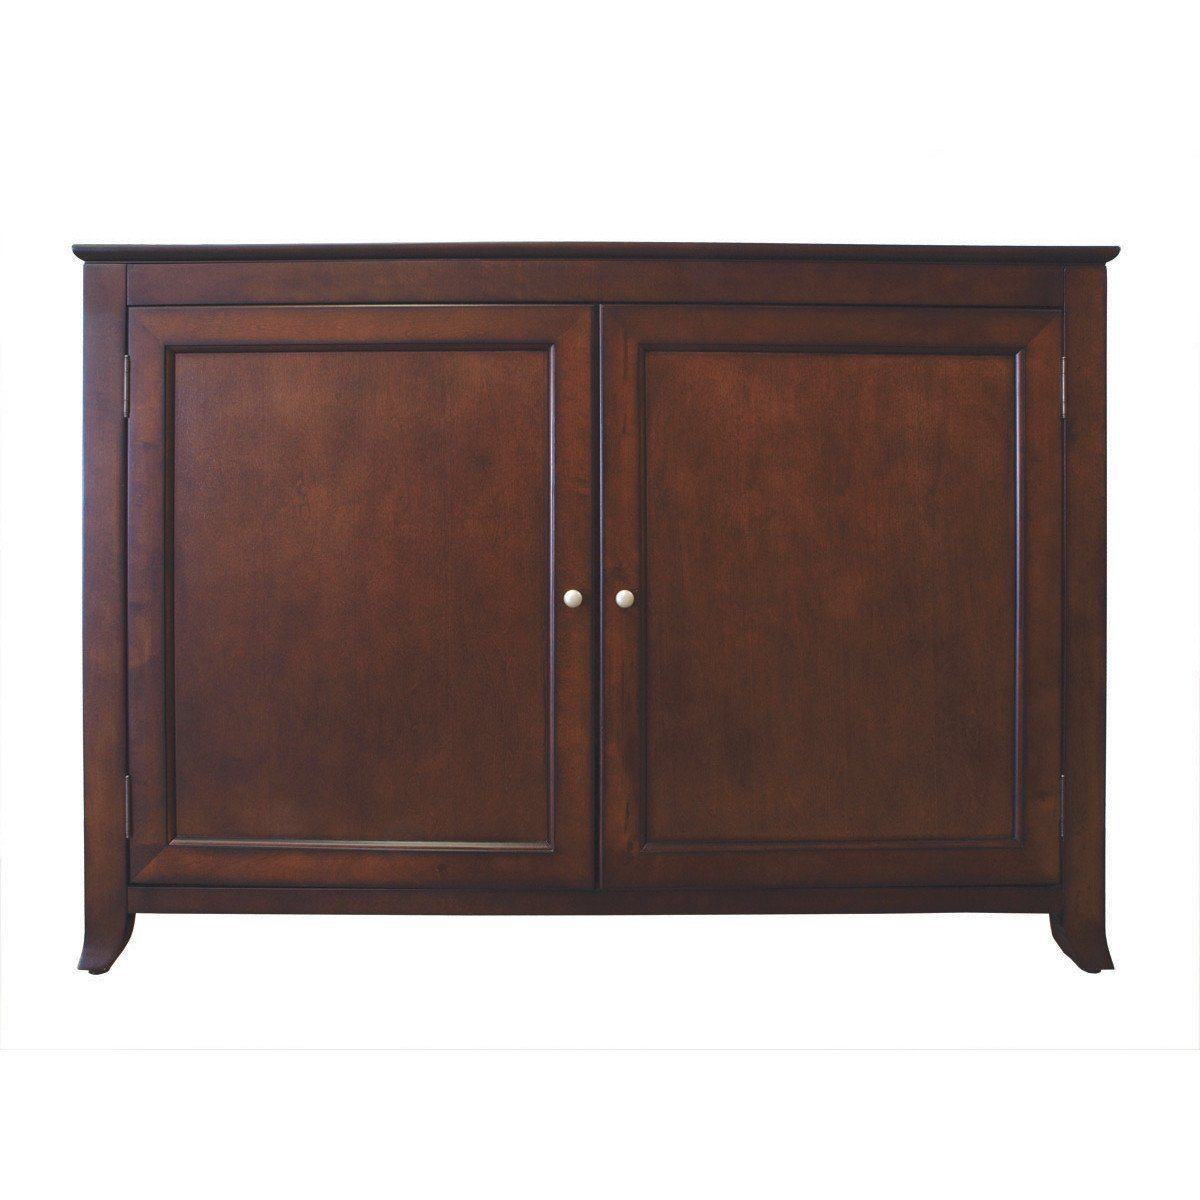 Touchstone Monterey Full Size Lift Cabinets For Up To 60” Flat Screen Tv’S Tv Lift Cabinets Touchstone 